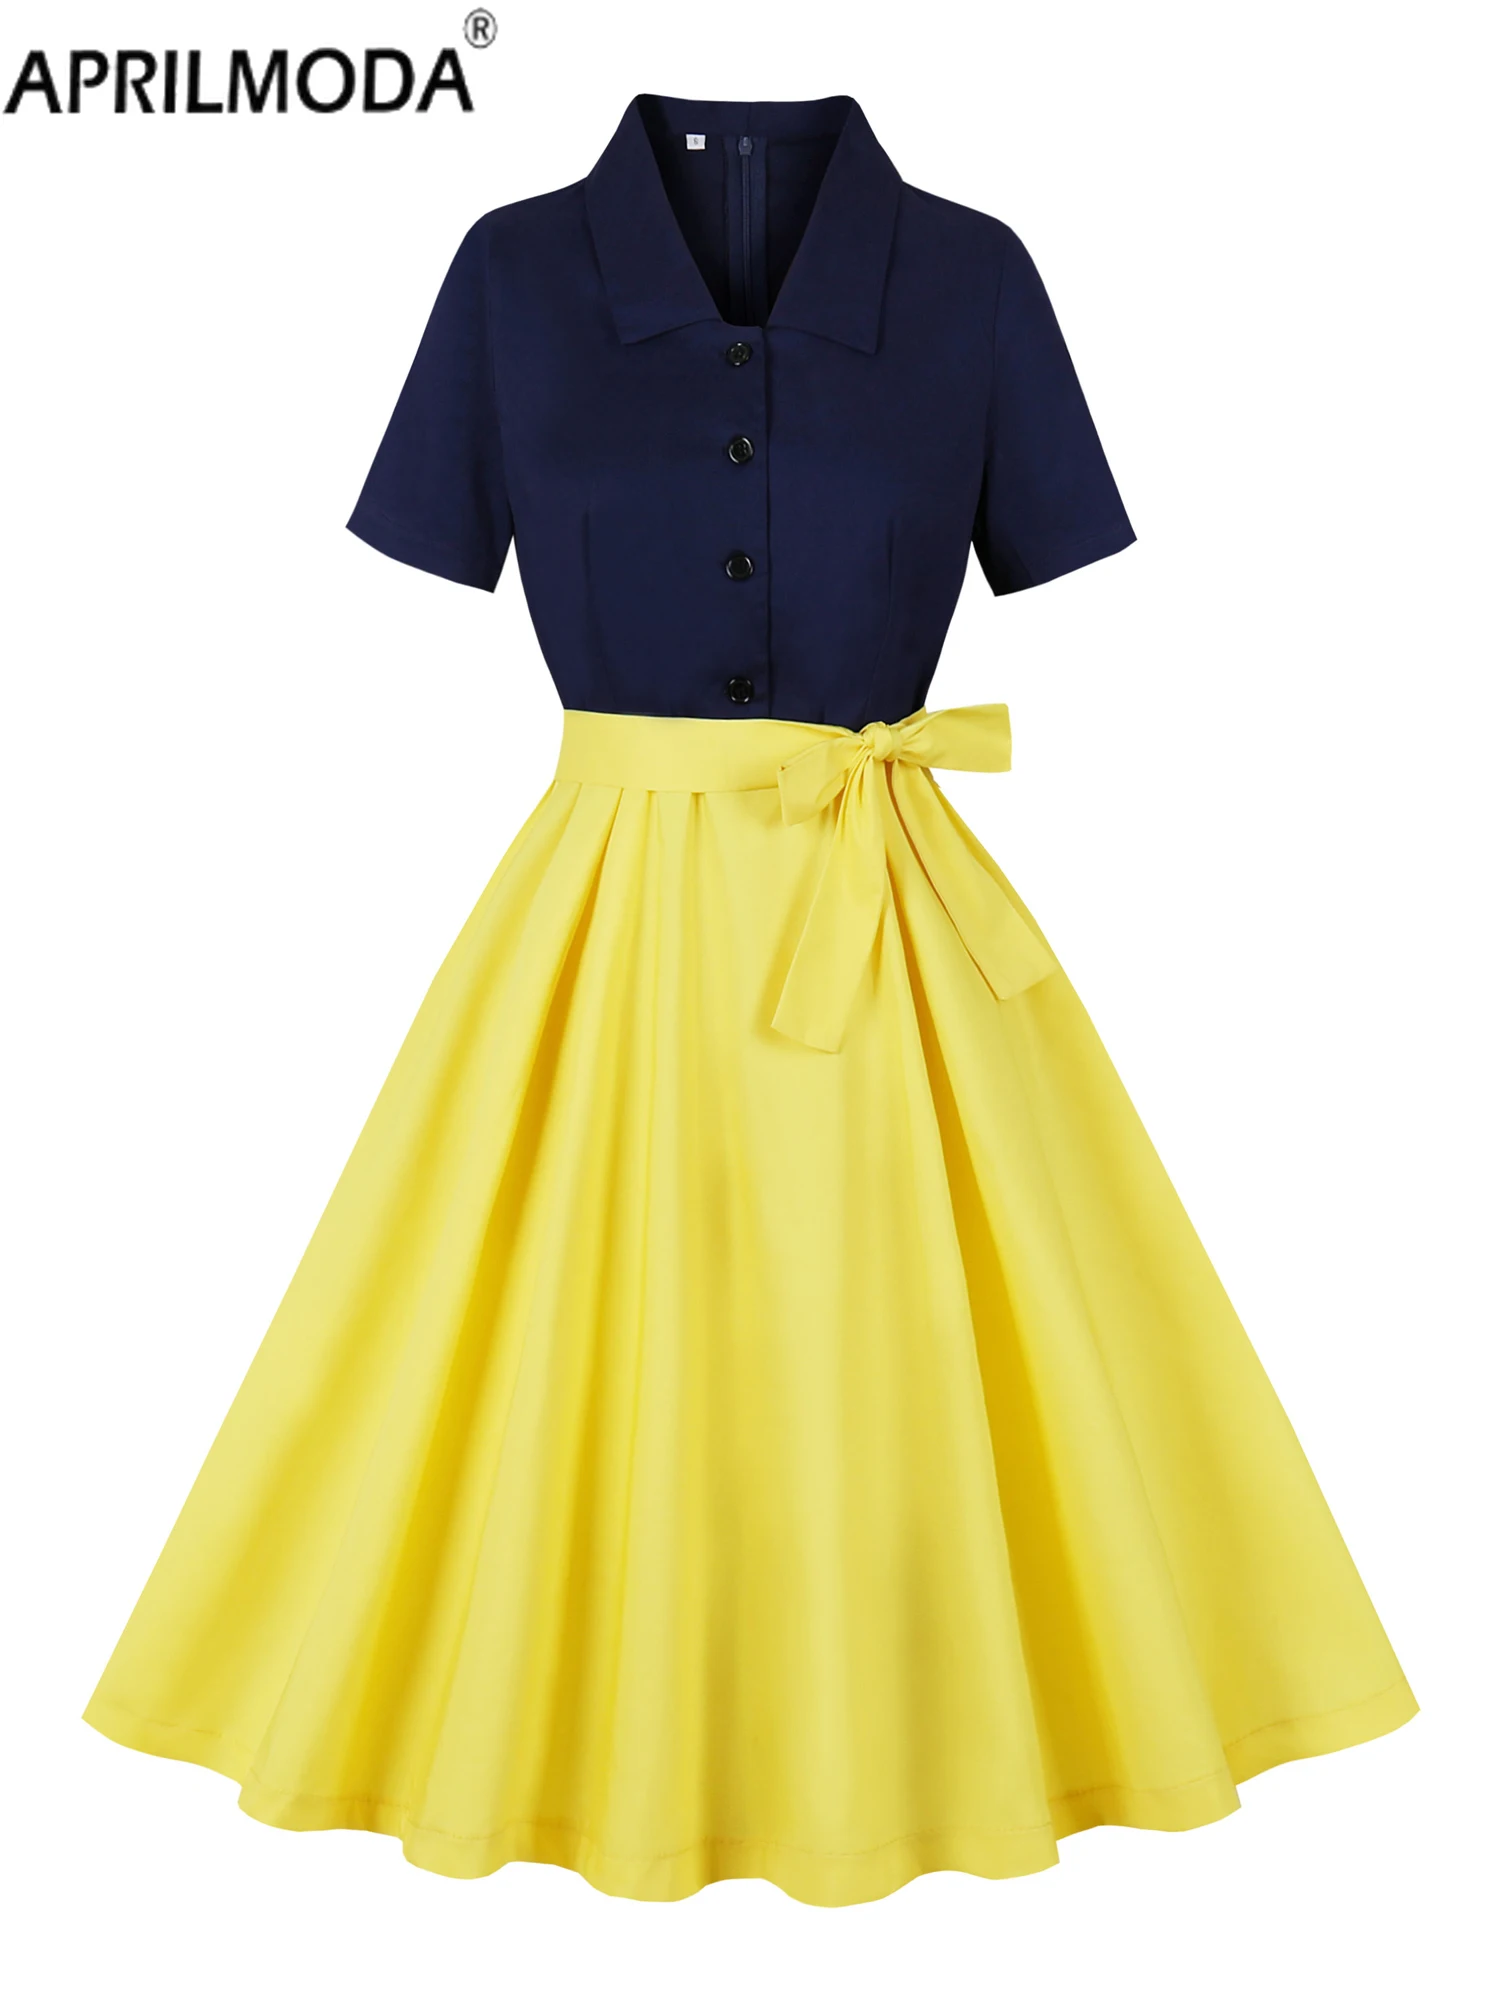 

Retro Women Flare Tea Patchwork Dress Navy Blue and Yellow Two Tone Turn-Down Collar Buttons Belted Summer 50s Vintage Dresses